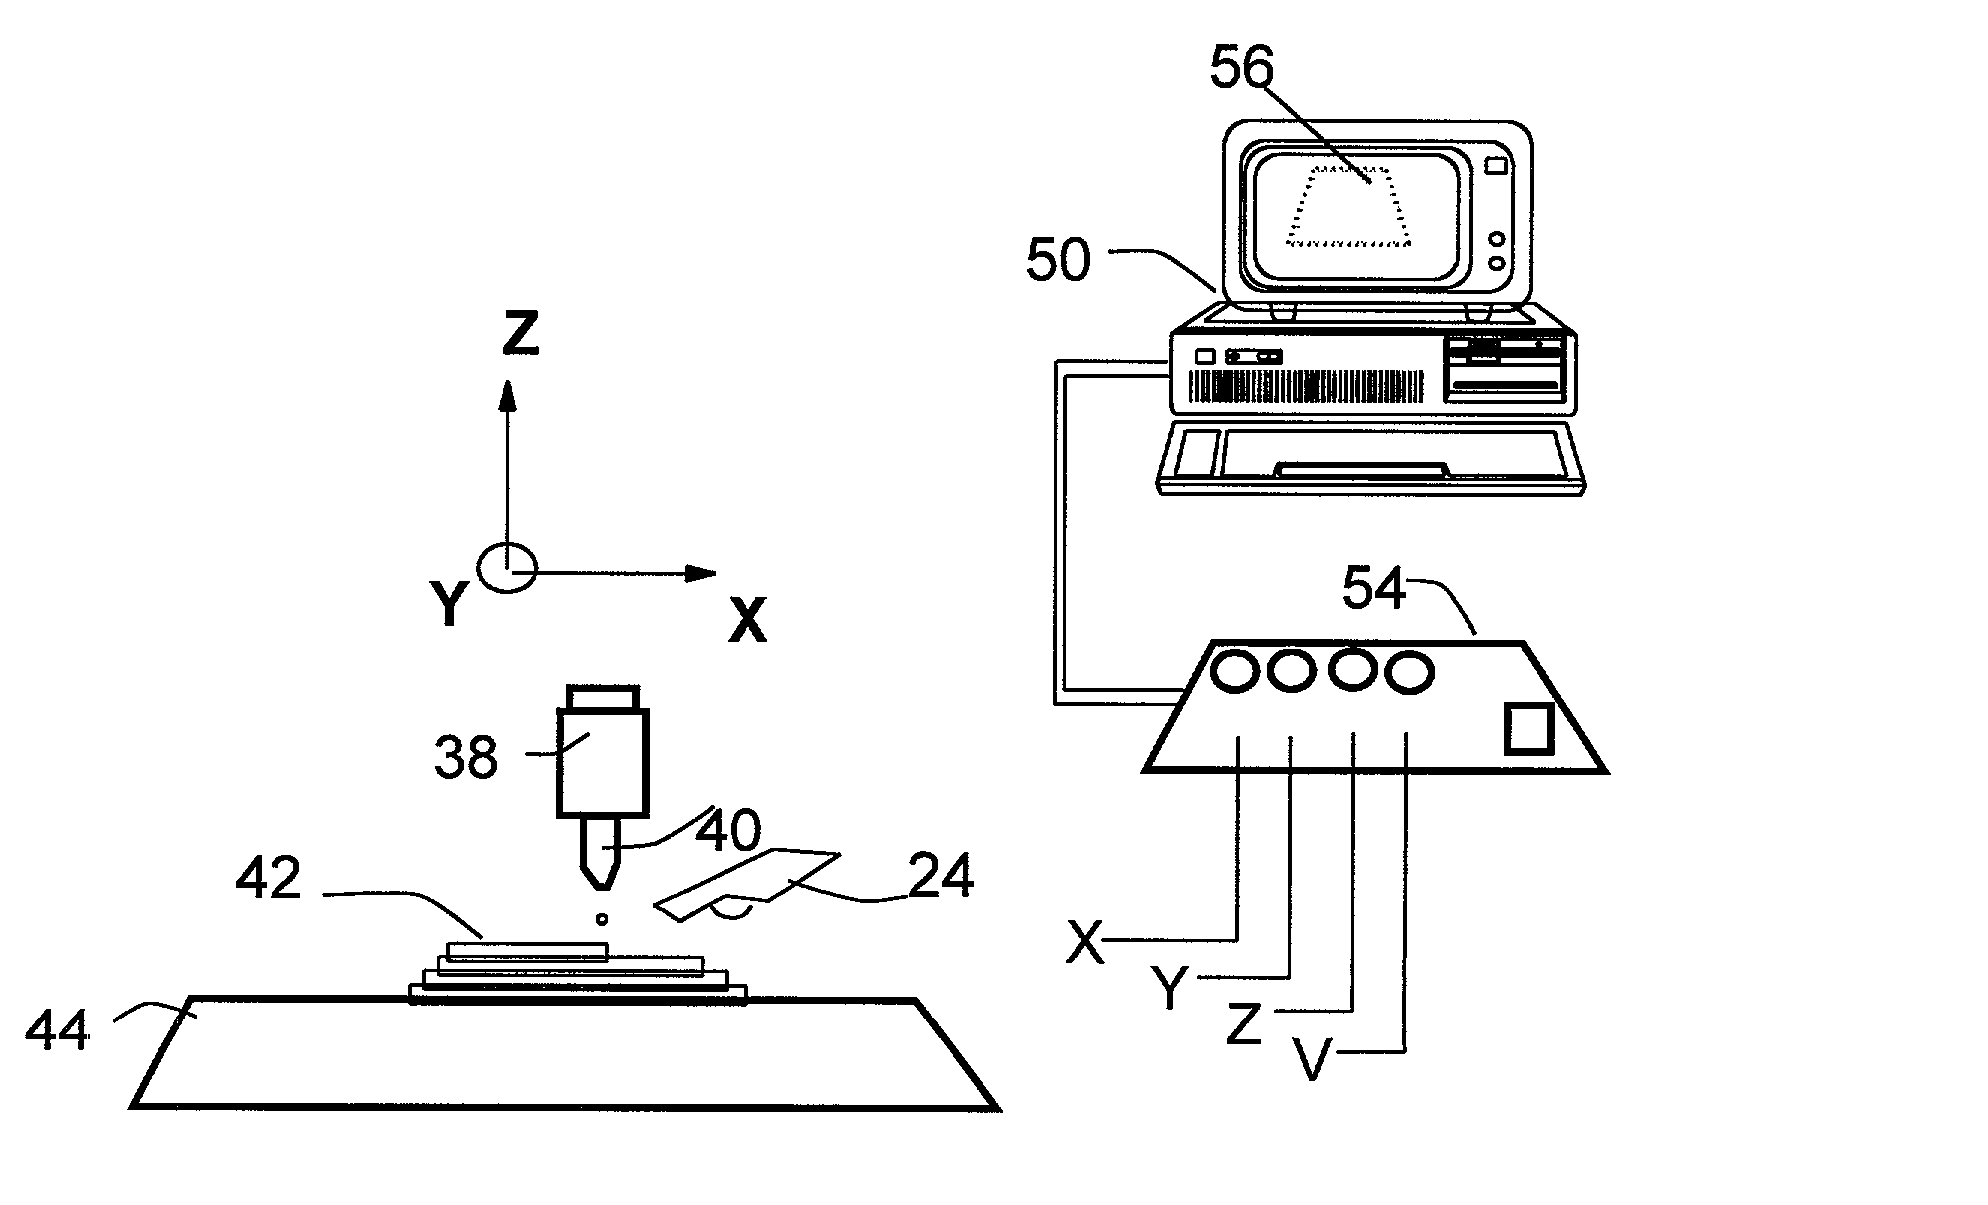 Droplet deposition method for rapid formation of 3-D objects from non-cross-linking reactive polymers